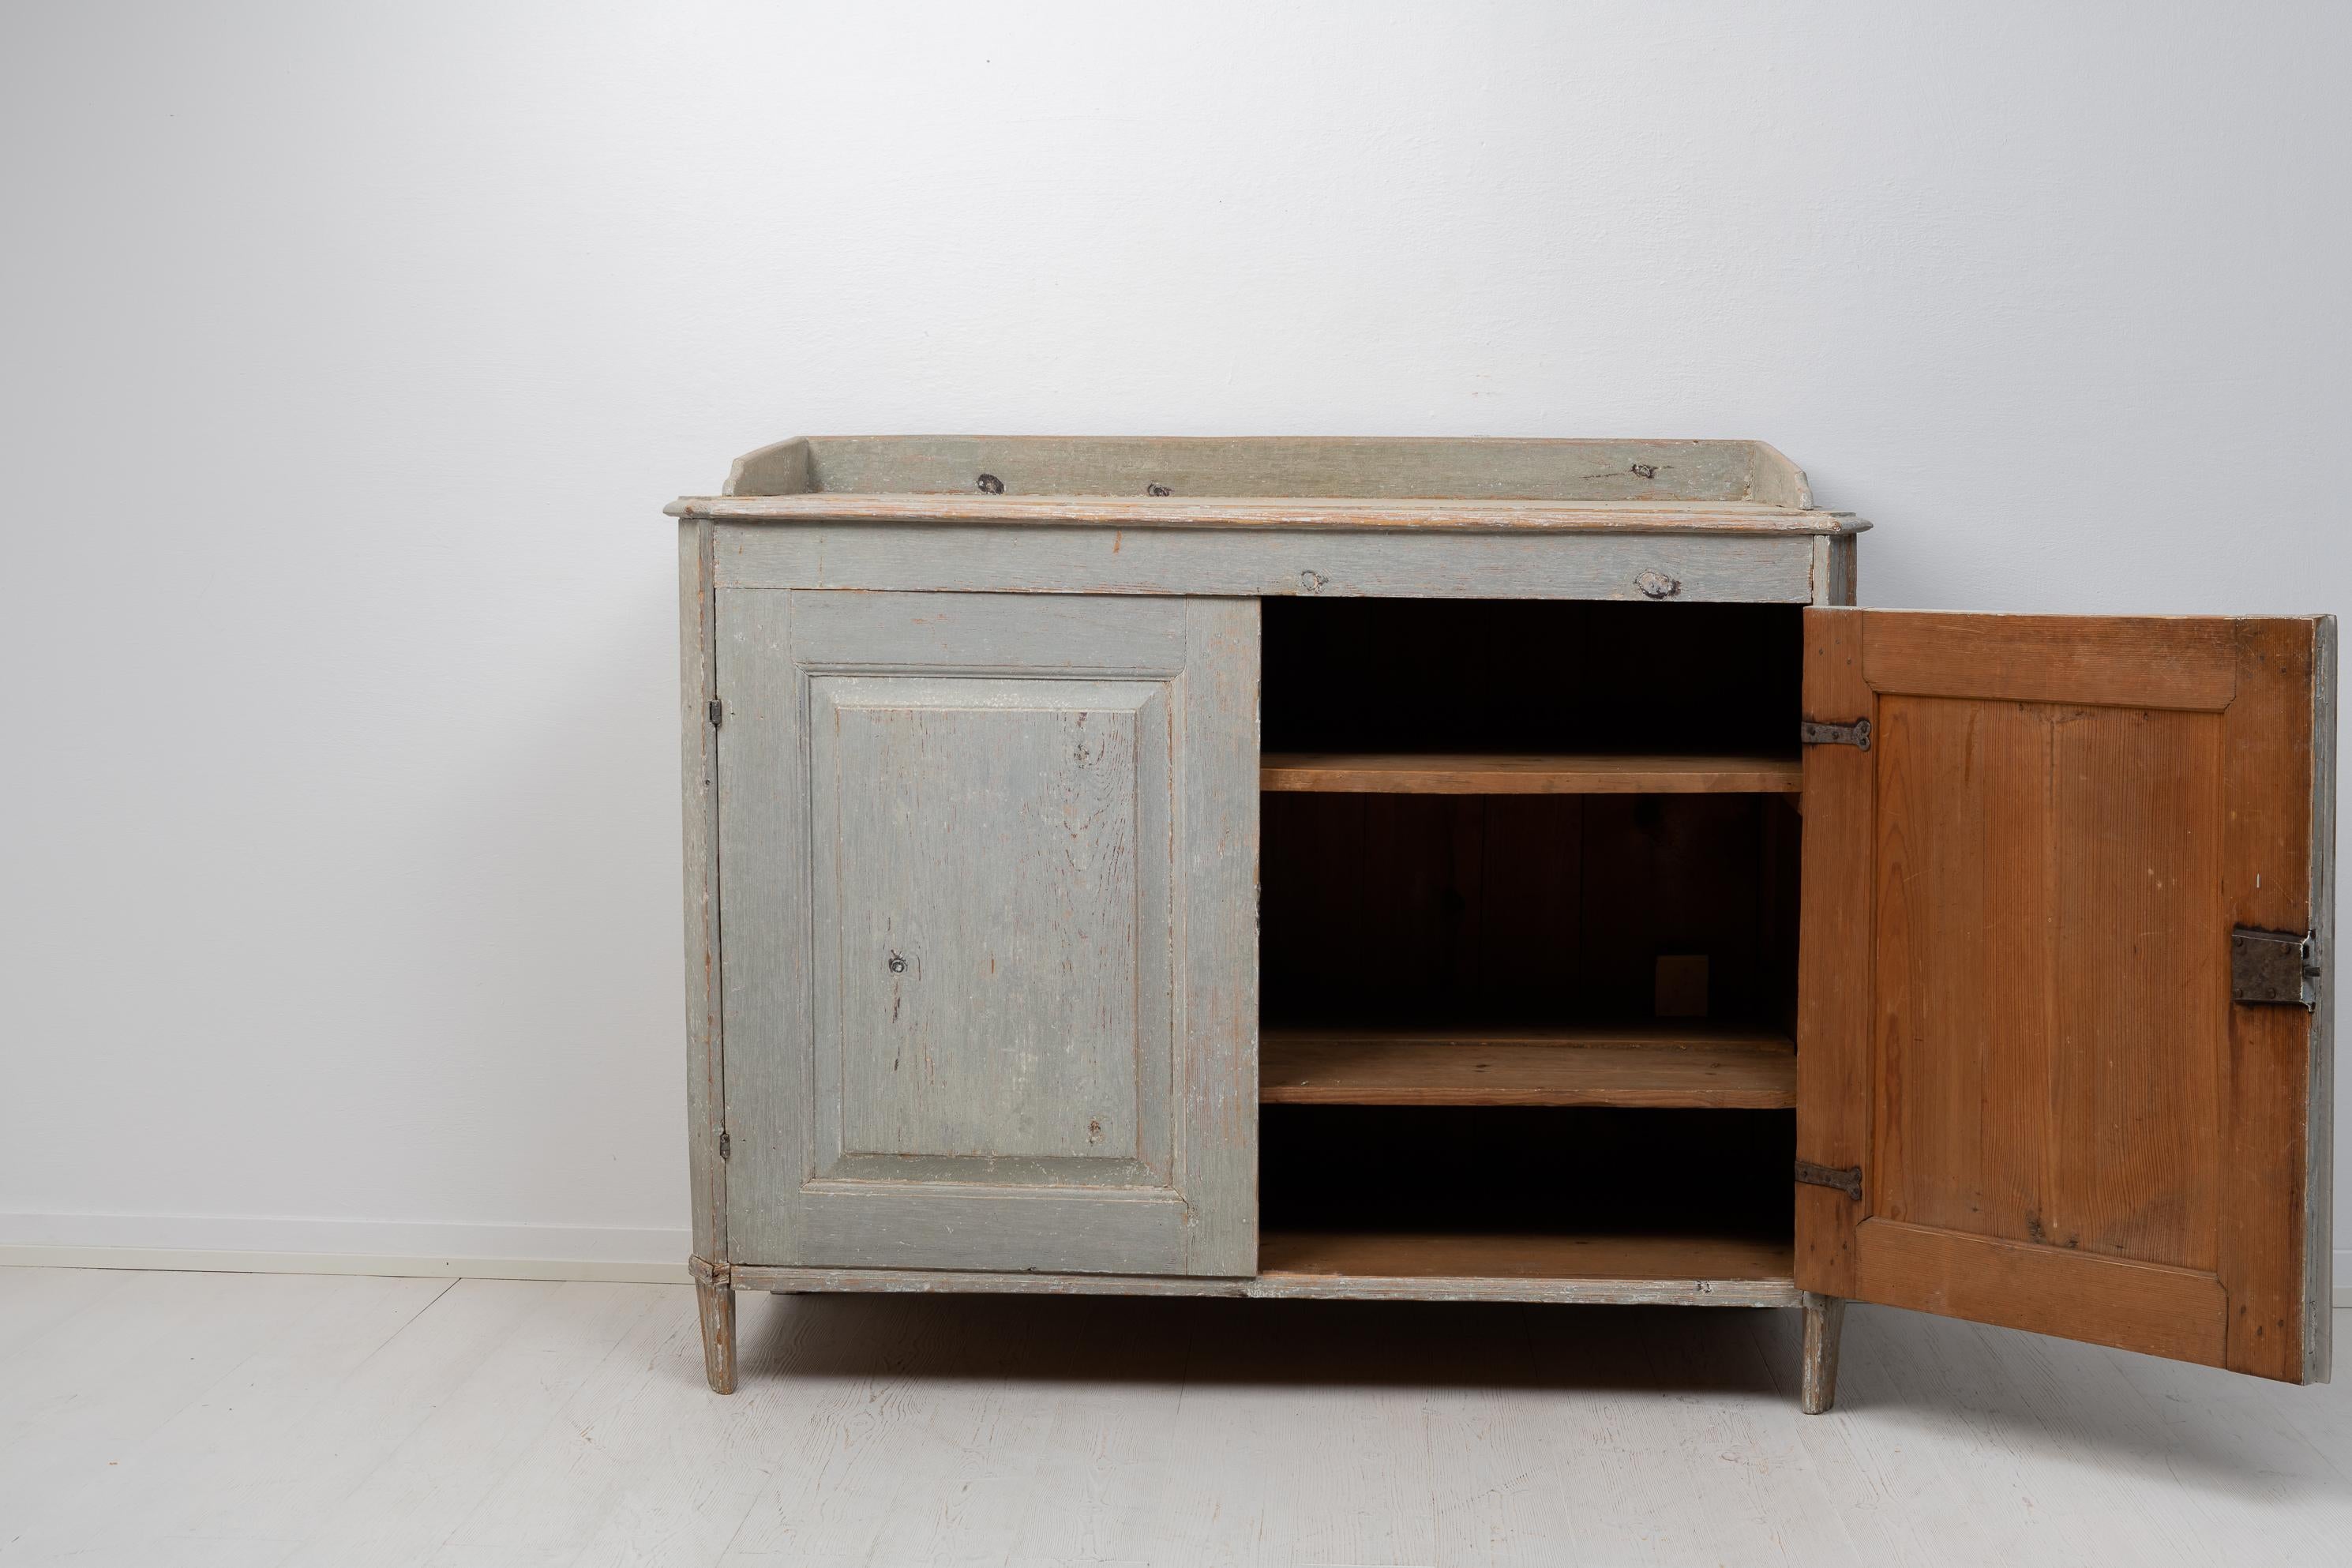 Rare Antique Genuine Swedish Gustavian Sideboard In Good Condition For Sale In Kramfors, SE